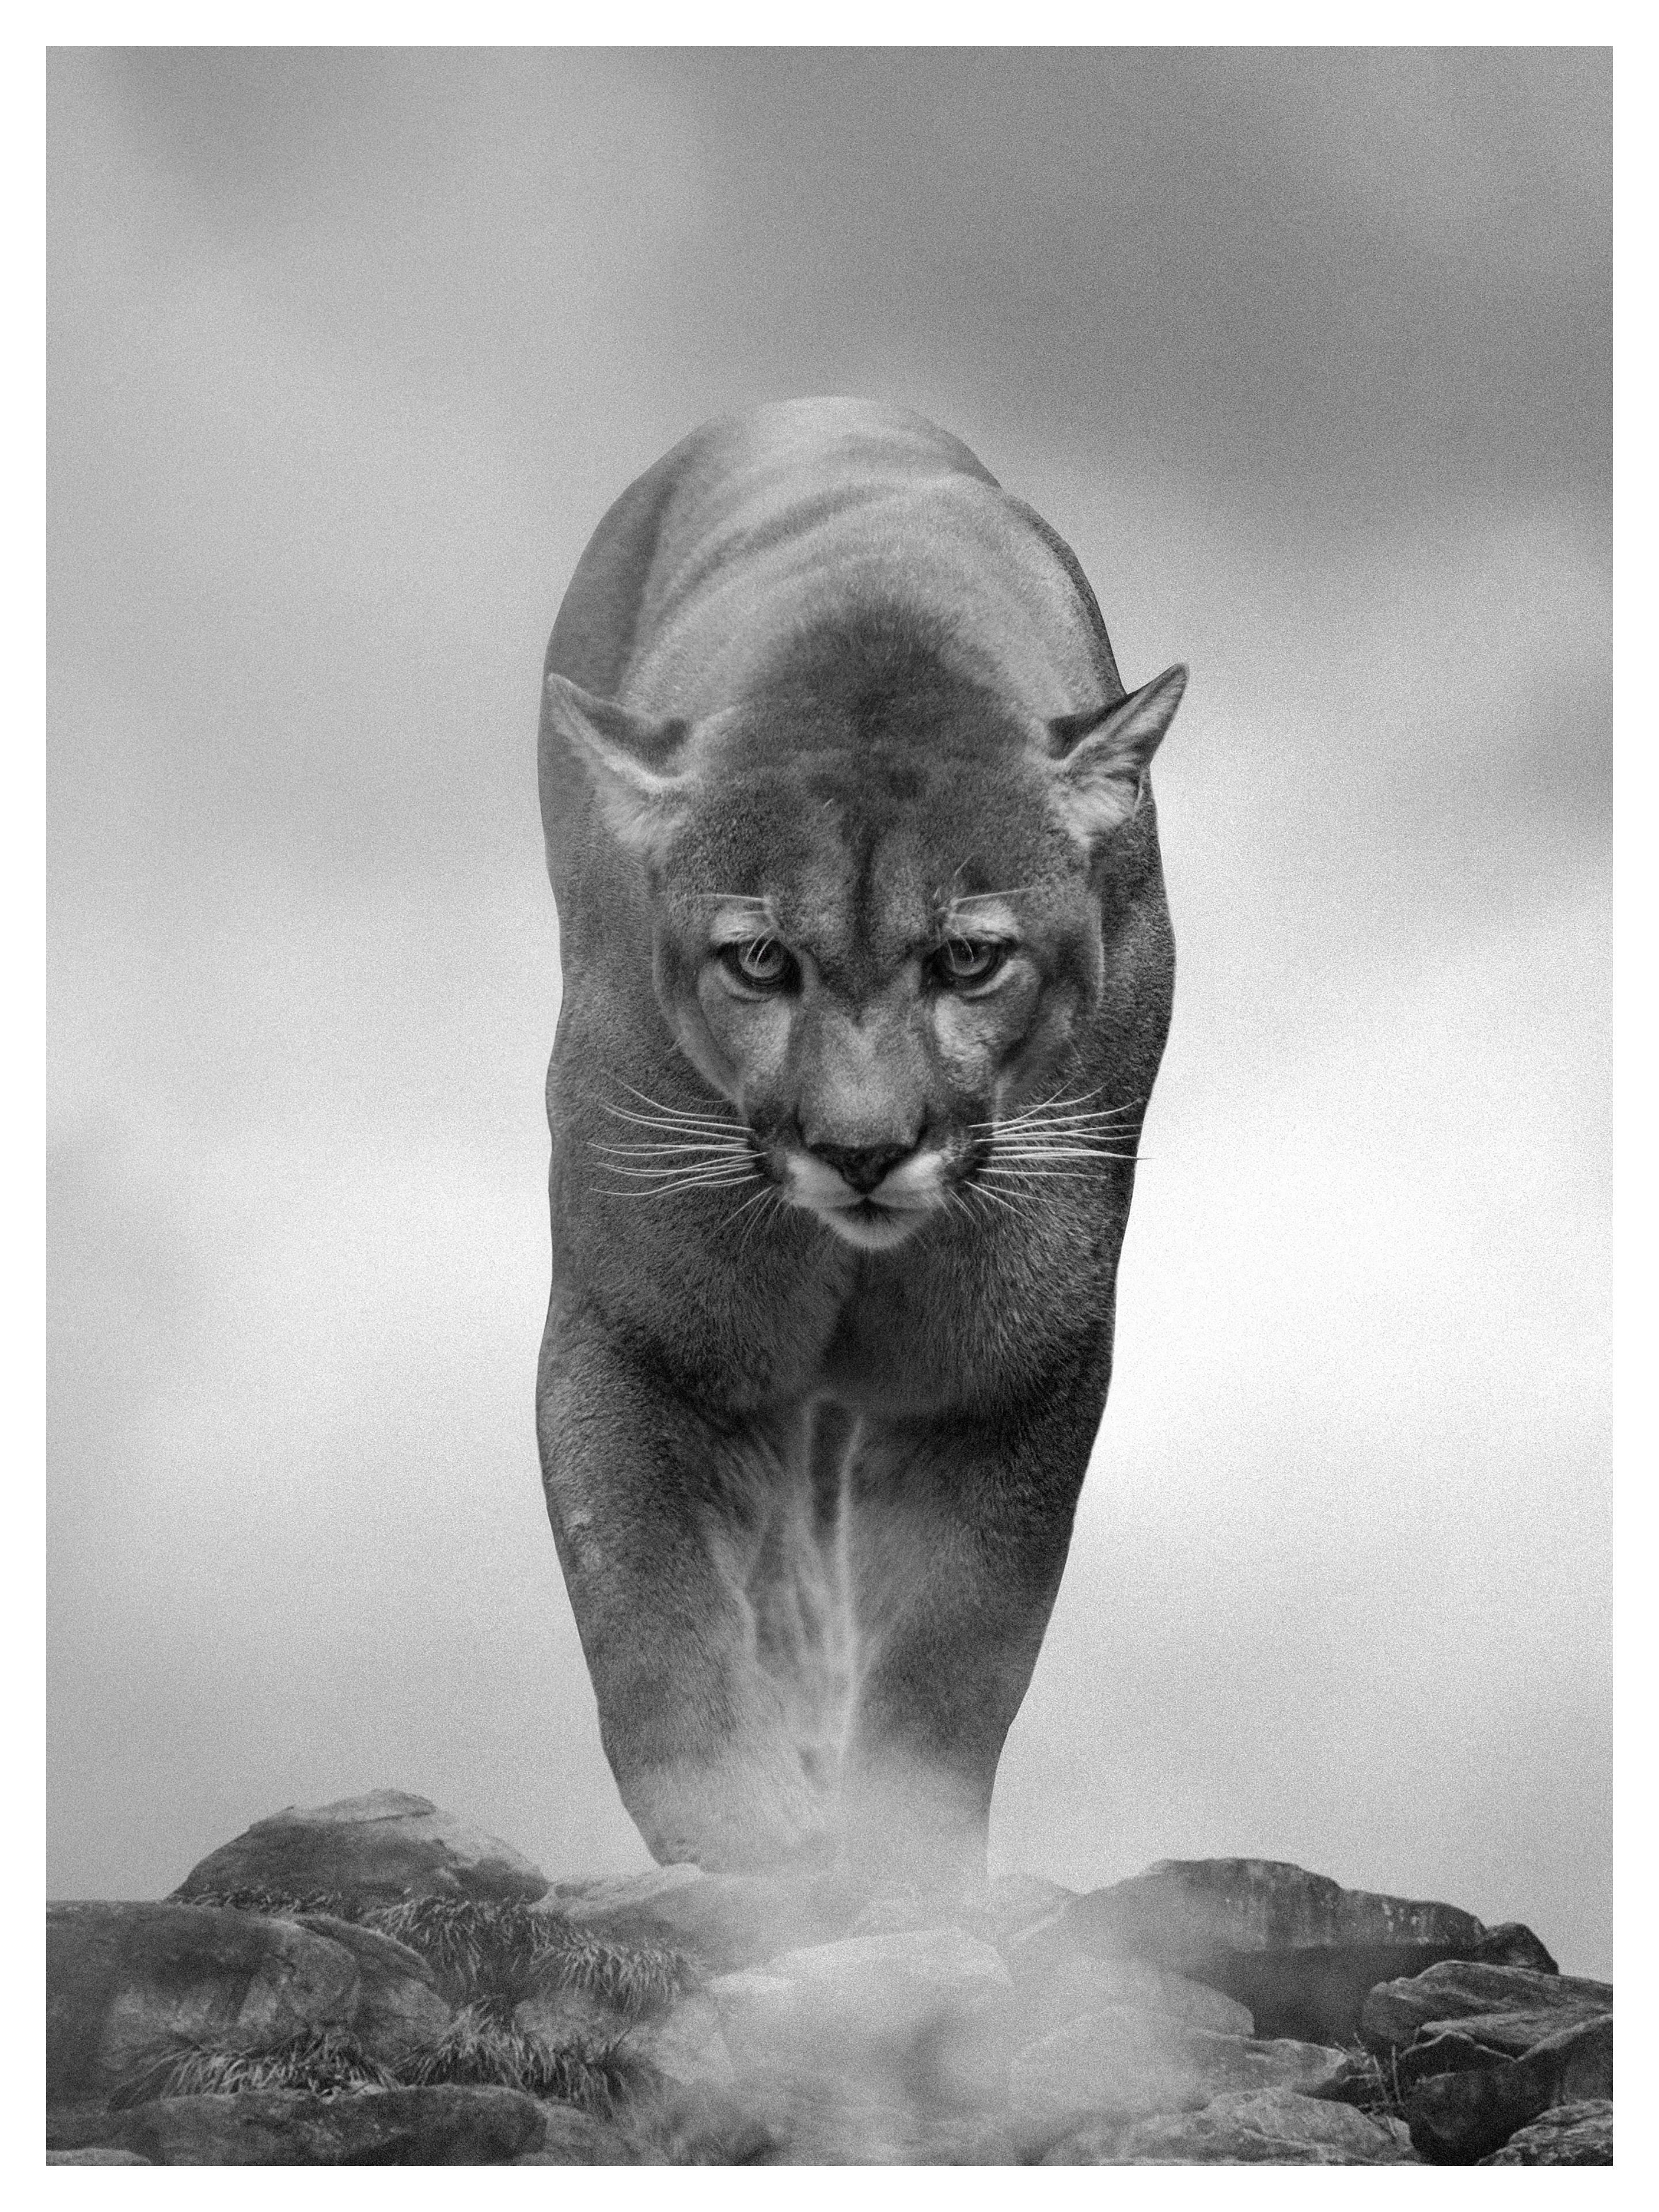 Shane Russeck Animal Print - "King of the Mountain" - 40x60  Black & White Photography, Cougar, Mountain Lion